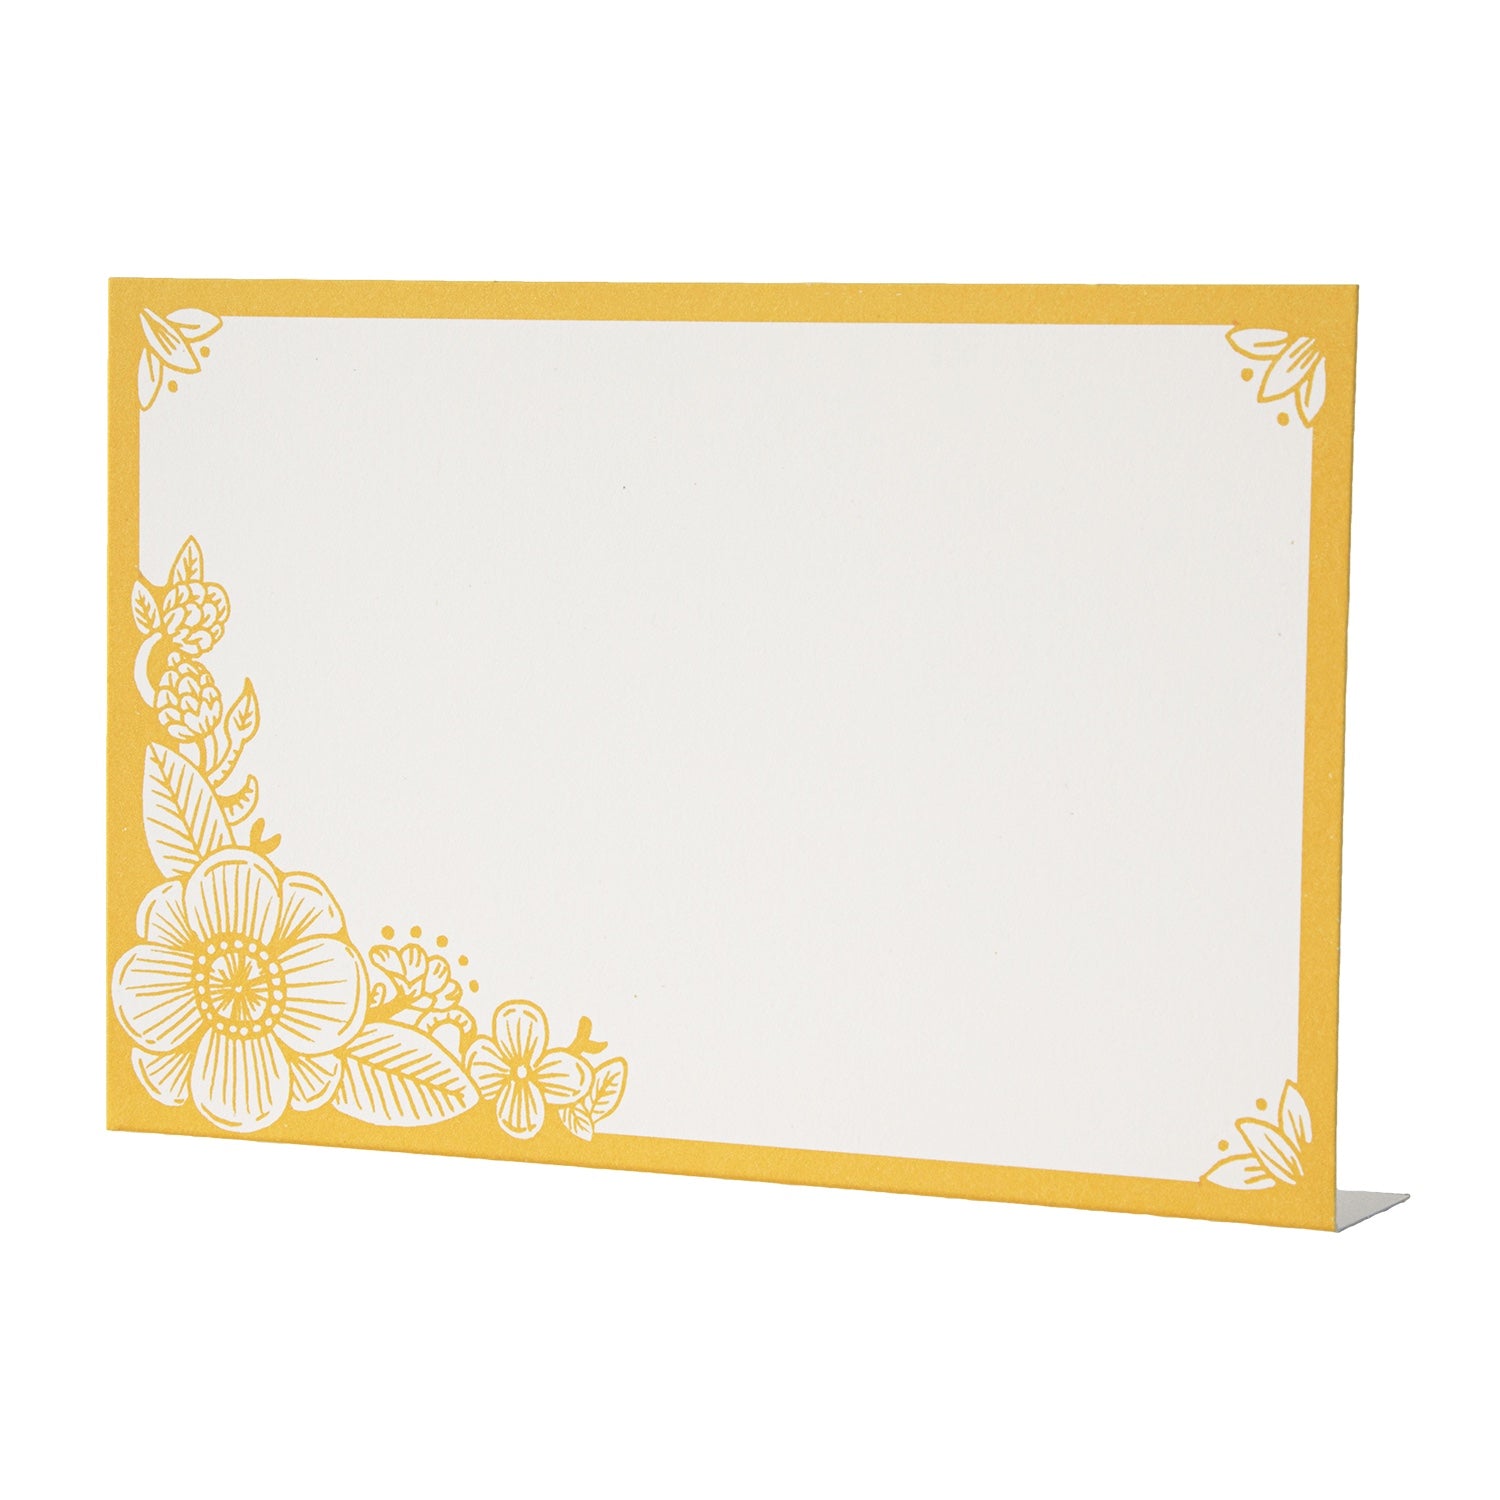 A hand-painted yellow and white Spring Blooms place card with a Fiesta Floral design by Hester &amp; Cook.